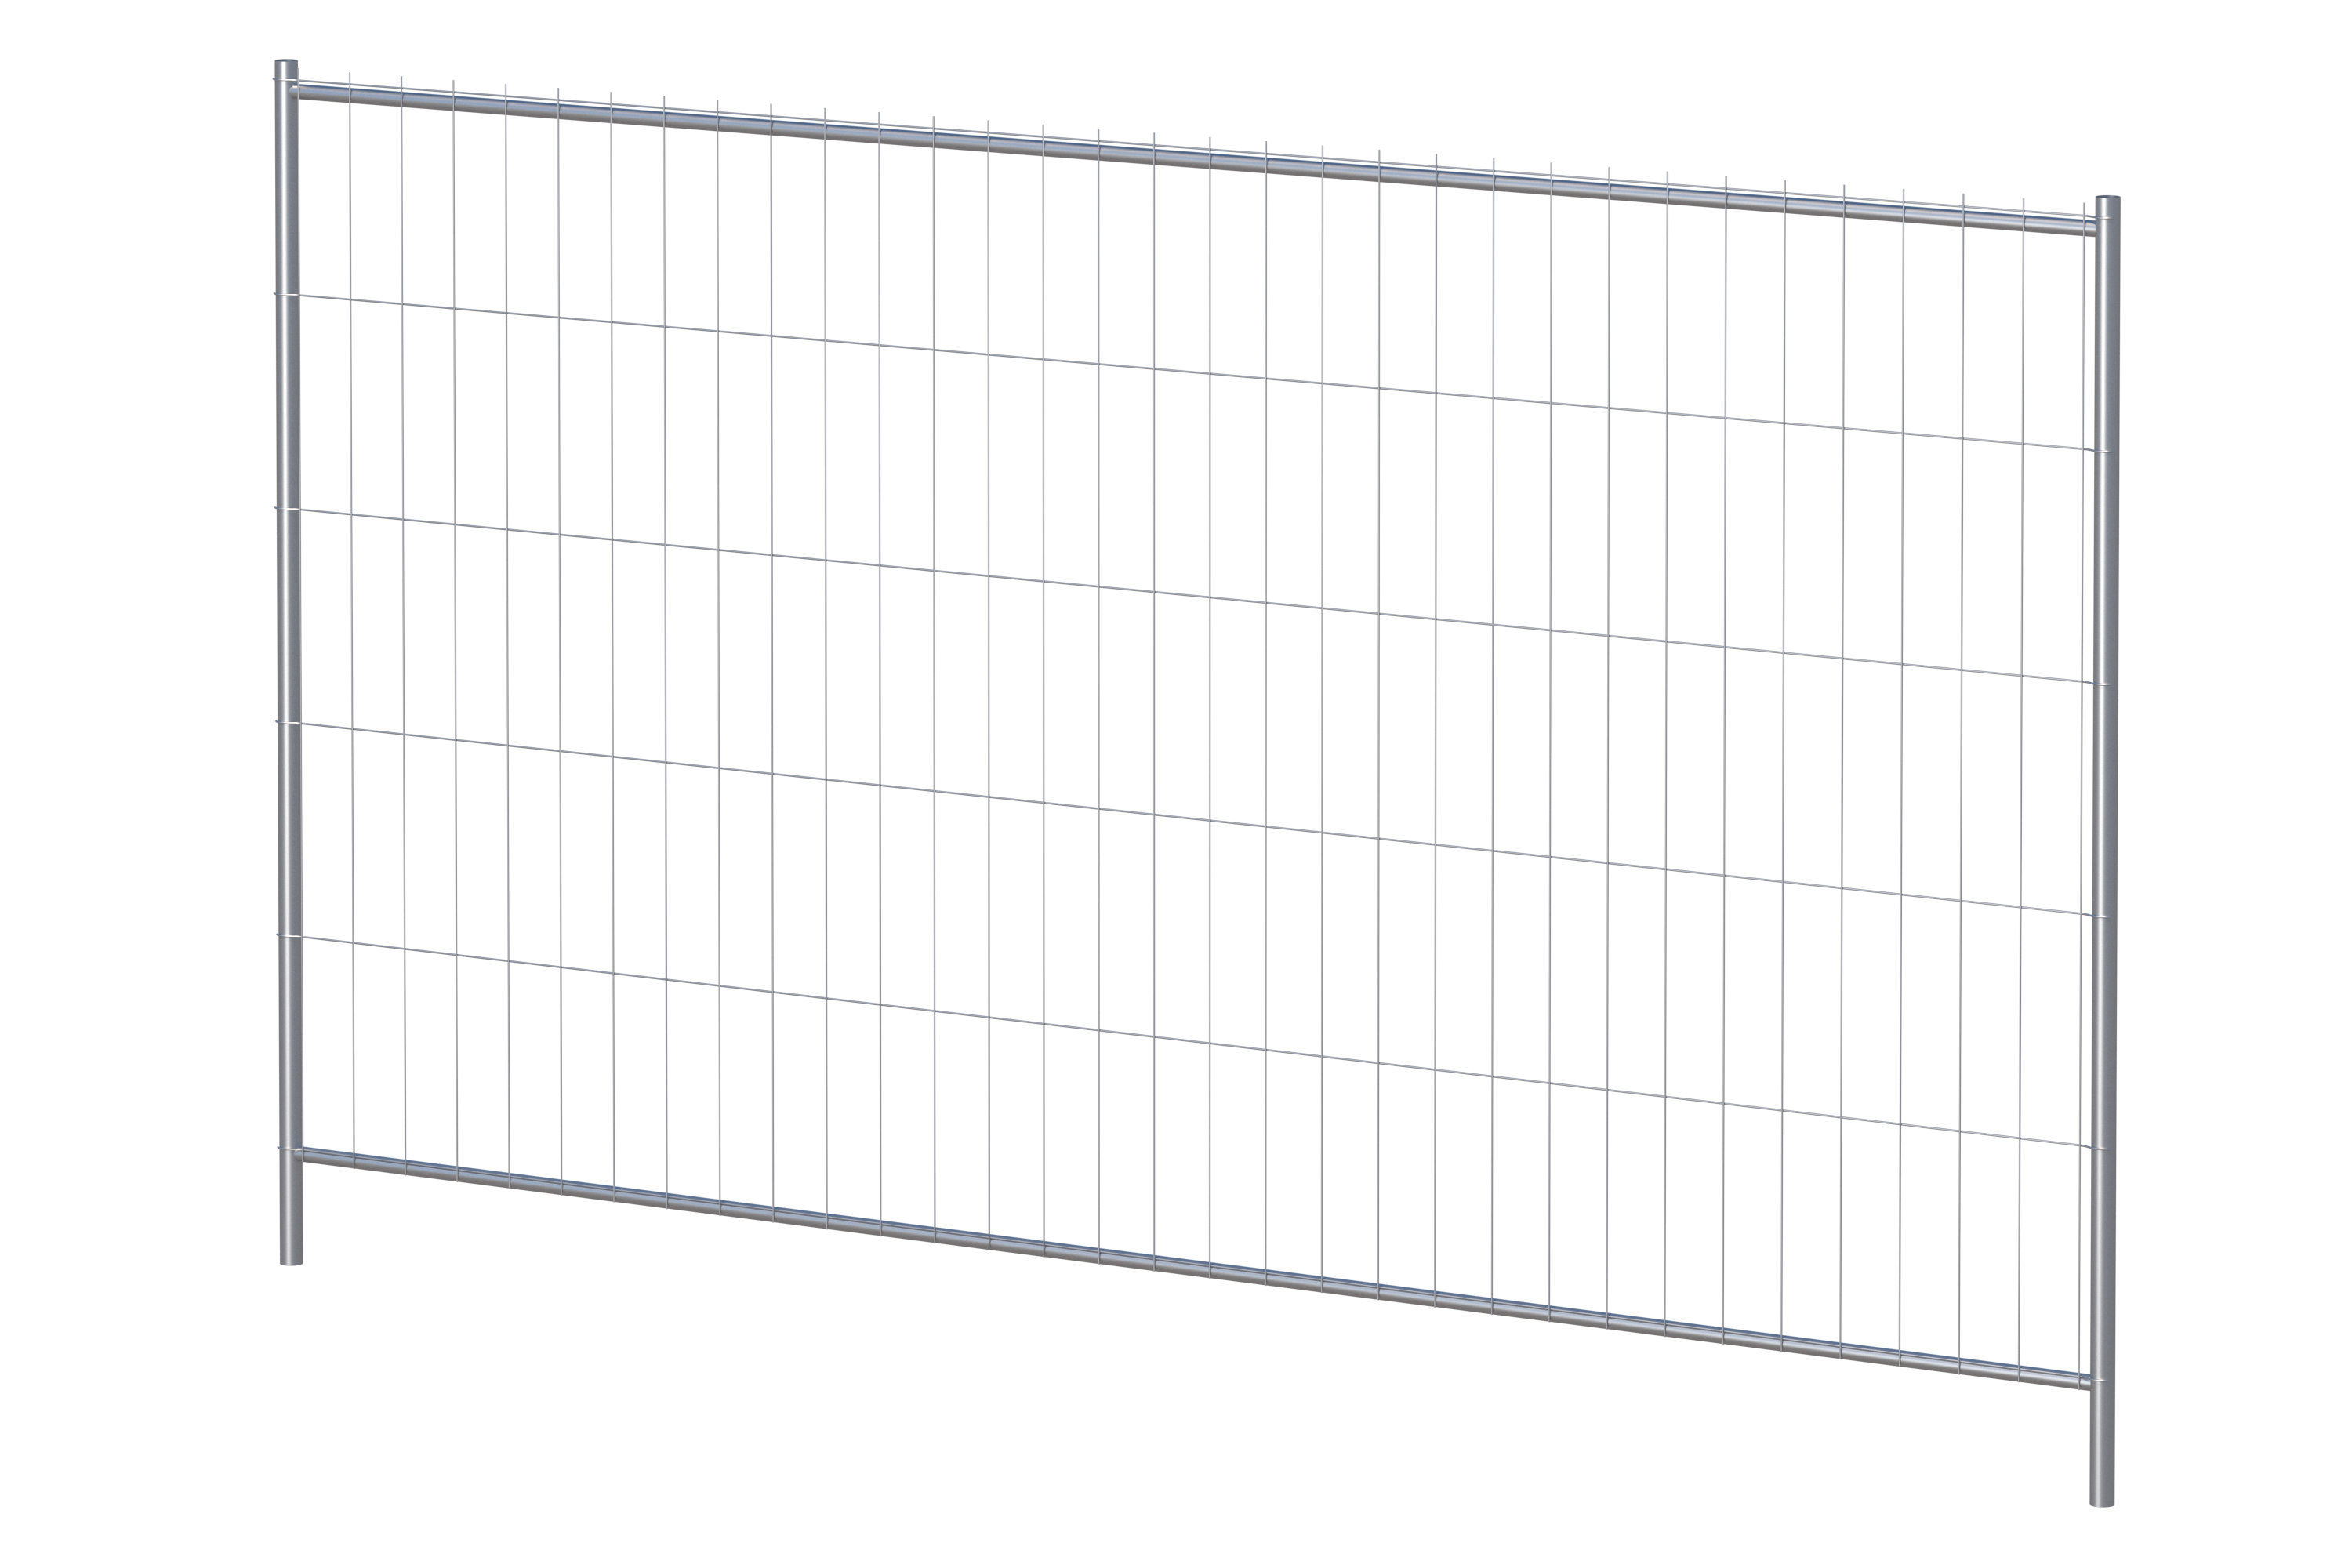 Mobile Fence M350-1